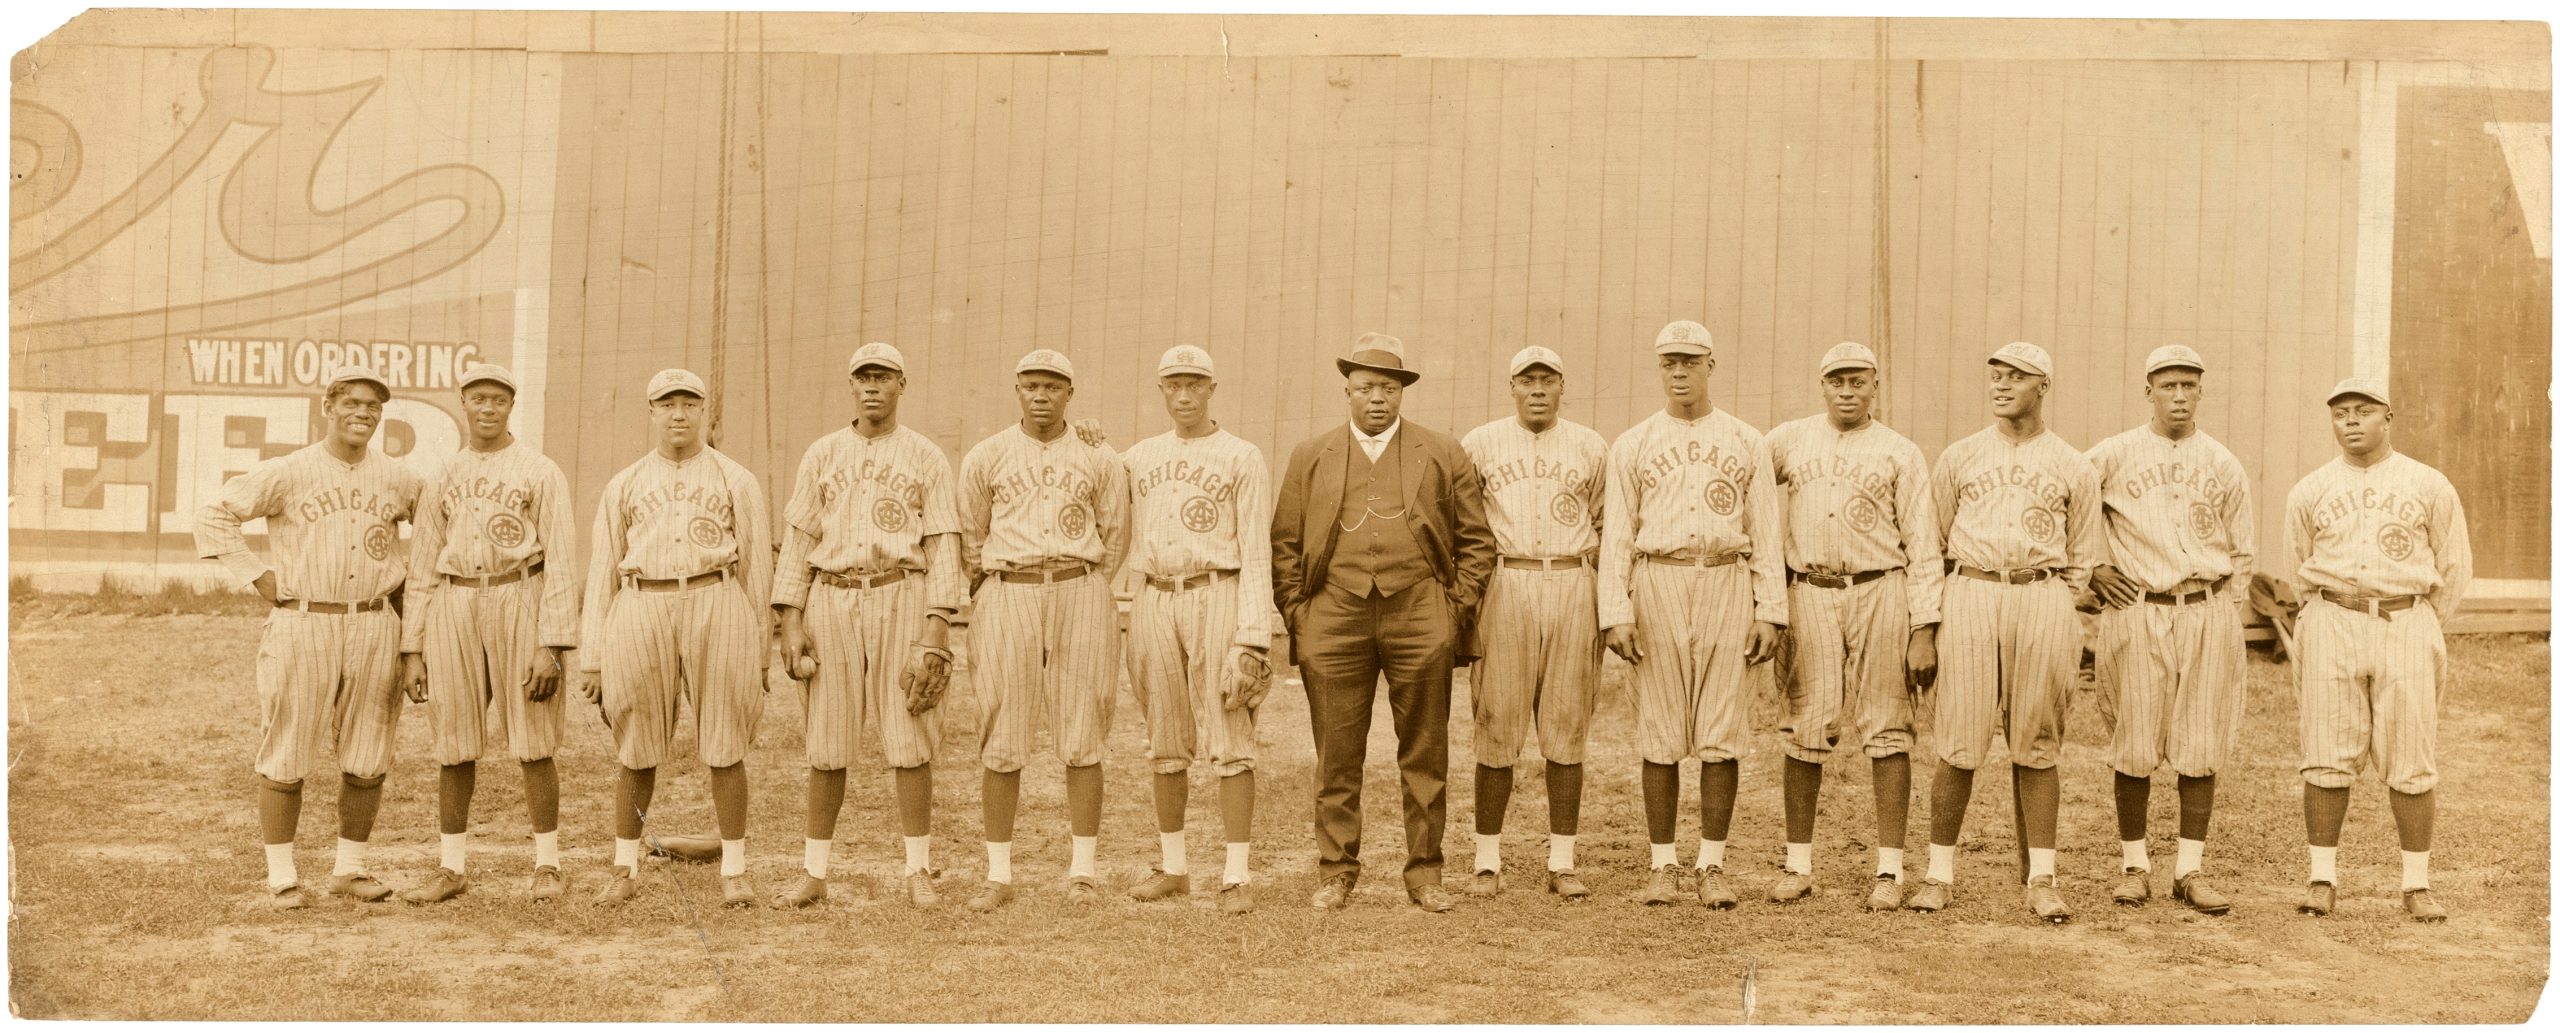 Rube Foster (center) while managing the 1916 Chicago American Giants, from THE LEAGUE, a Magnolia Pictures release. © Hake’s Auction. Photo courtesy of Magnolia Pictures.